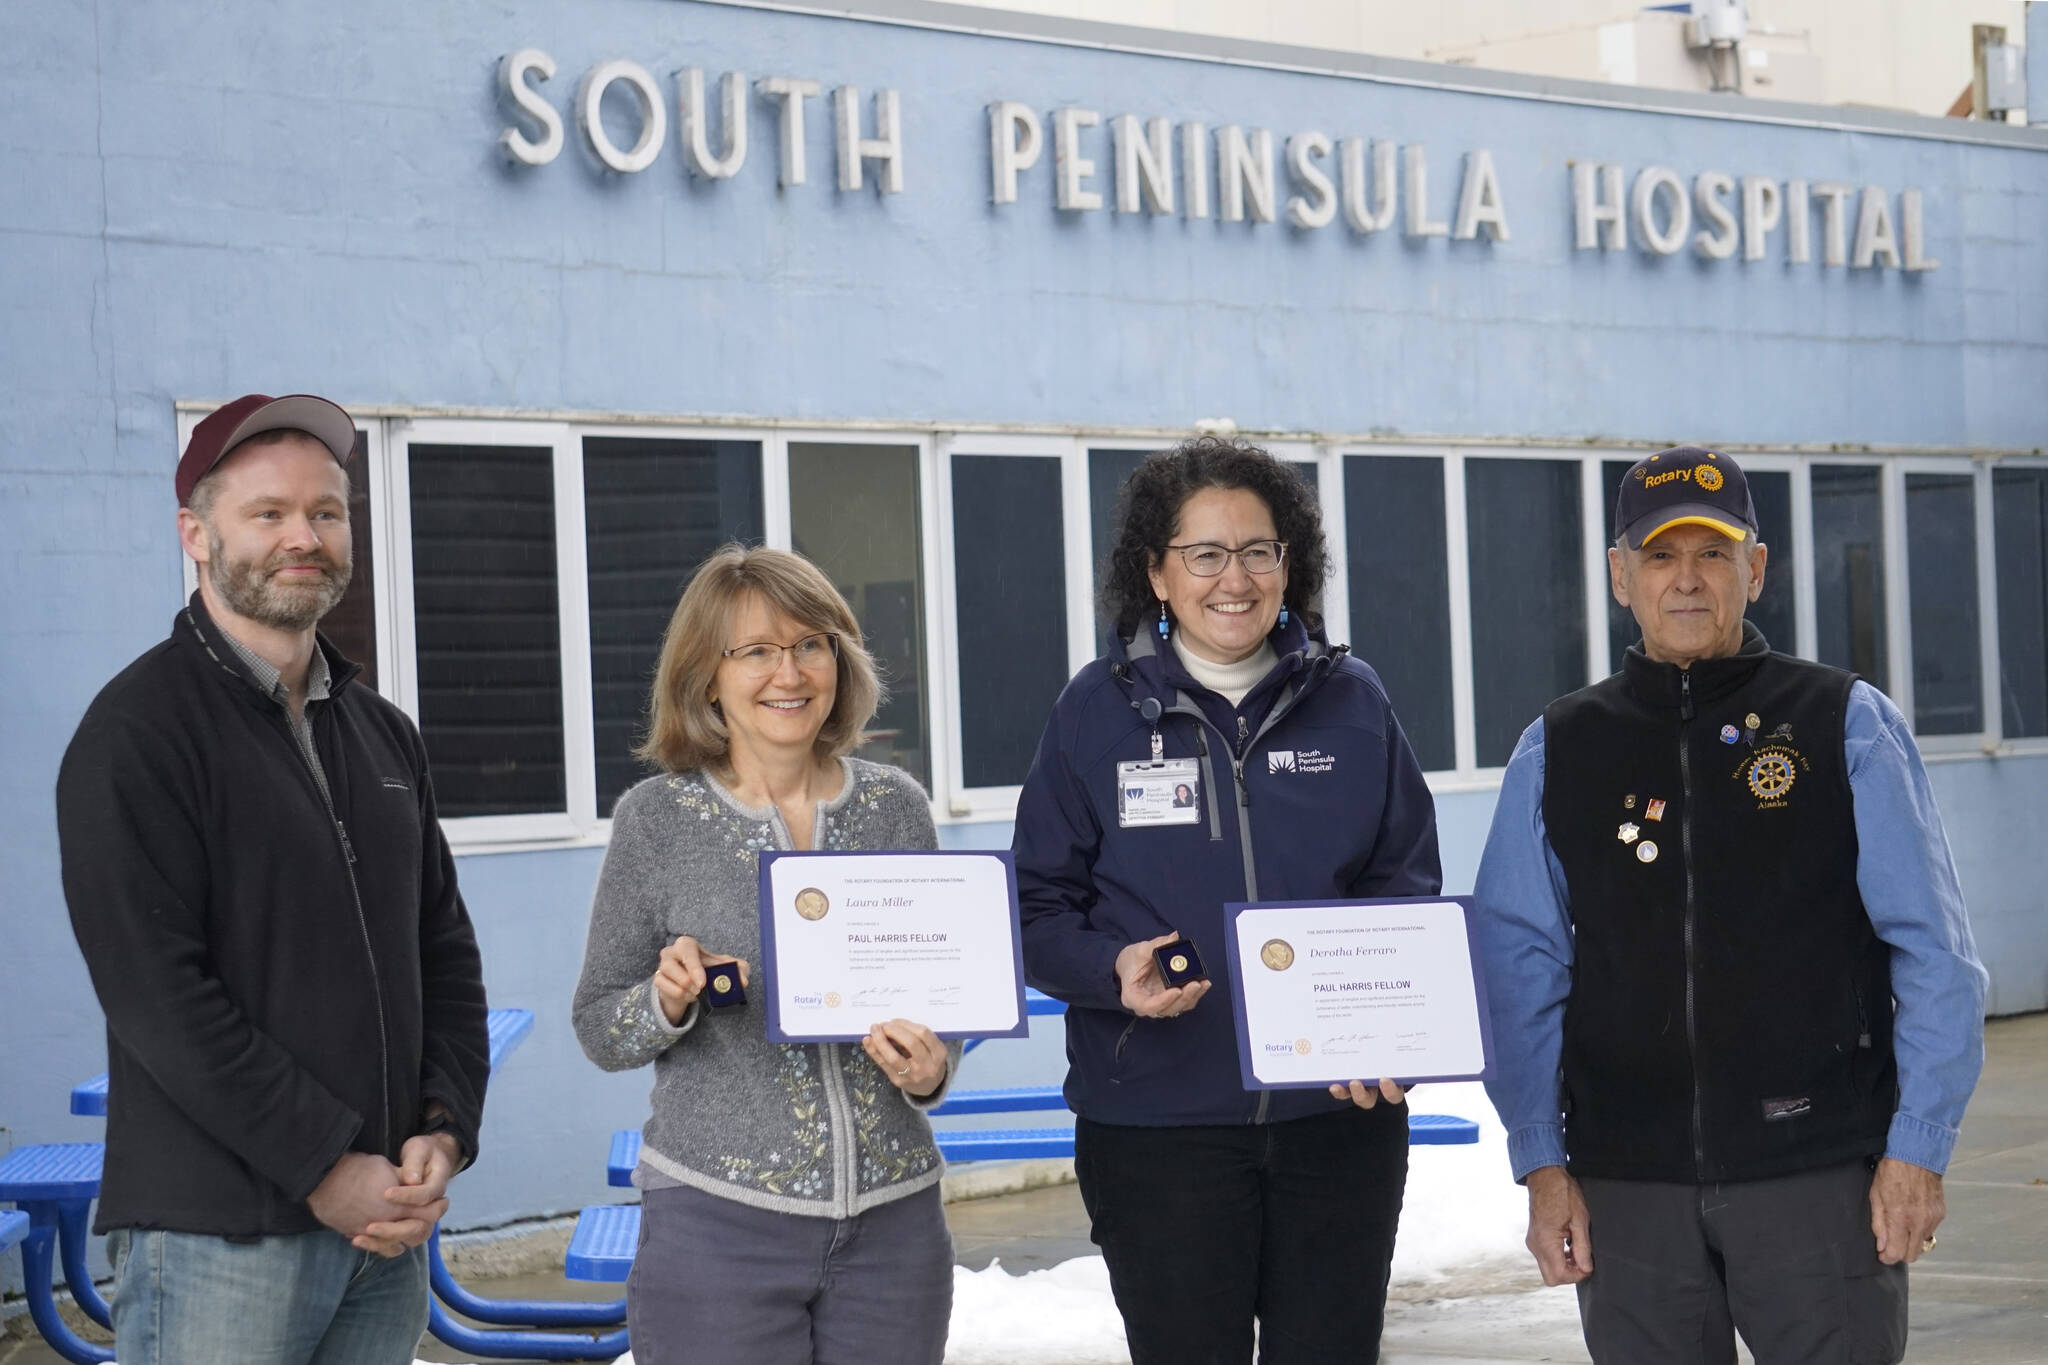 South Peninsula Hospital Laboratory Director Laura Miller, second from left, and SPH Director of Marketing and Public Relations Derotha Ferraro, second from right, were honored by the Rotary Club of Homer-Kachemak Bay on Thursday, Feb. 17, at South Peninsula Hospital in Homer, Alaska, for their contributions to the health of southern Kenai Peninsula communities. Presenting the awards were Bernie Griffard, club president, far right, and Van Hawkins, co-chair of the annual Rotary Health Fair. (Photo by Michael Armstrong/Homer News)